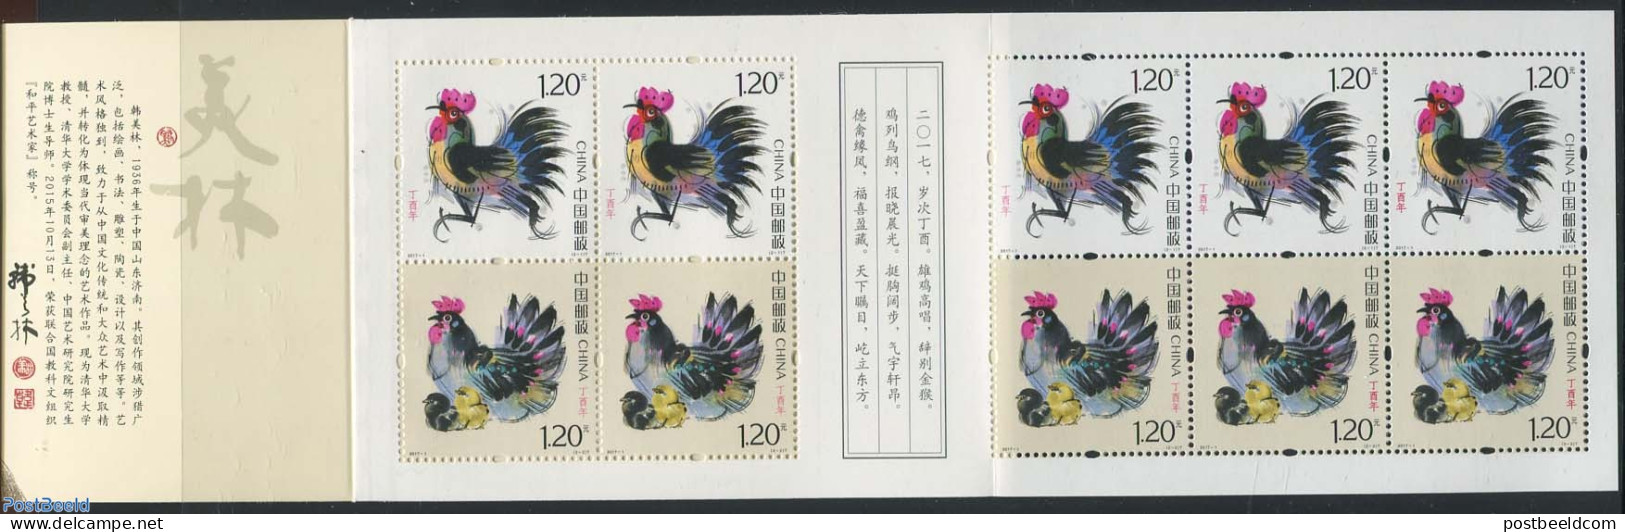 China People’s Republic 2017 Year Of The Rooster Booklet, Mint NH, Nature - Various - Birds - Poultry - Stamp Bookle.. - Unused Stamps